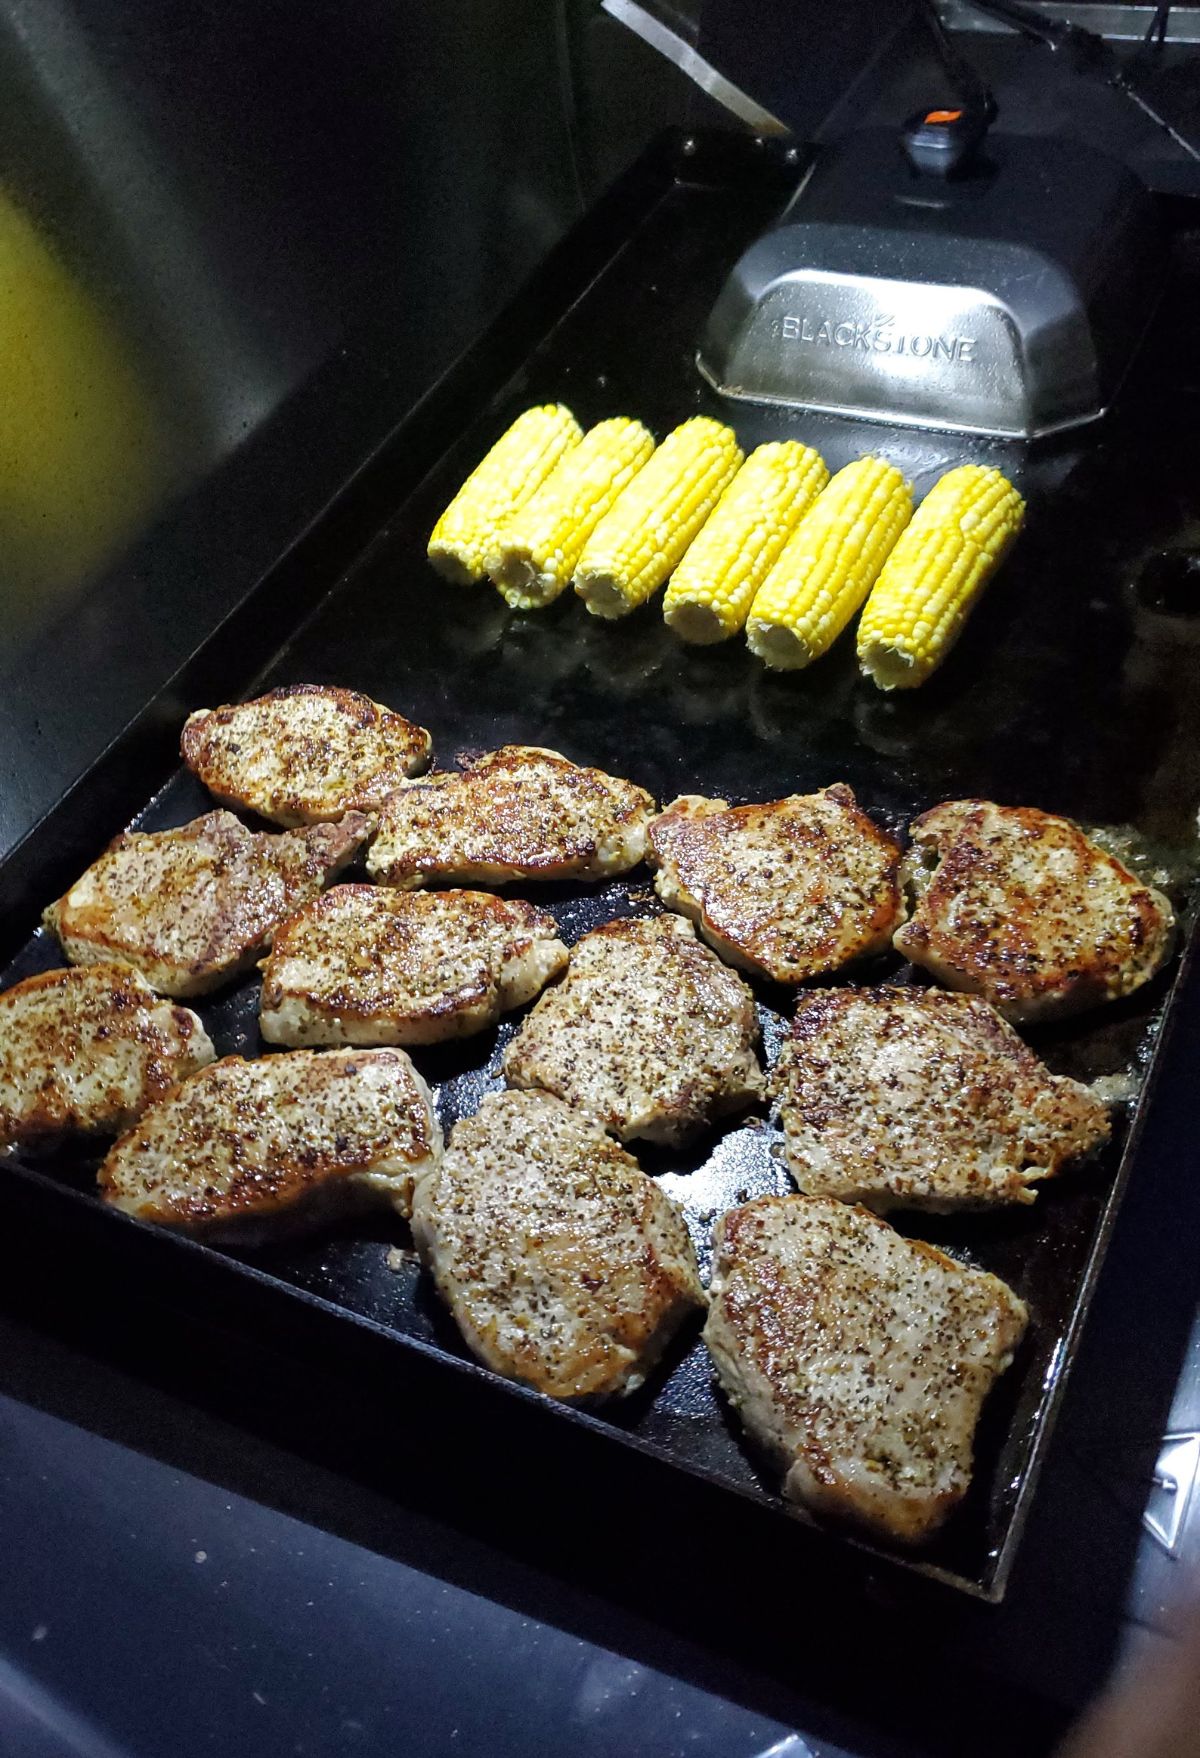 A tray of grilled meat and corn on the grill.